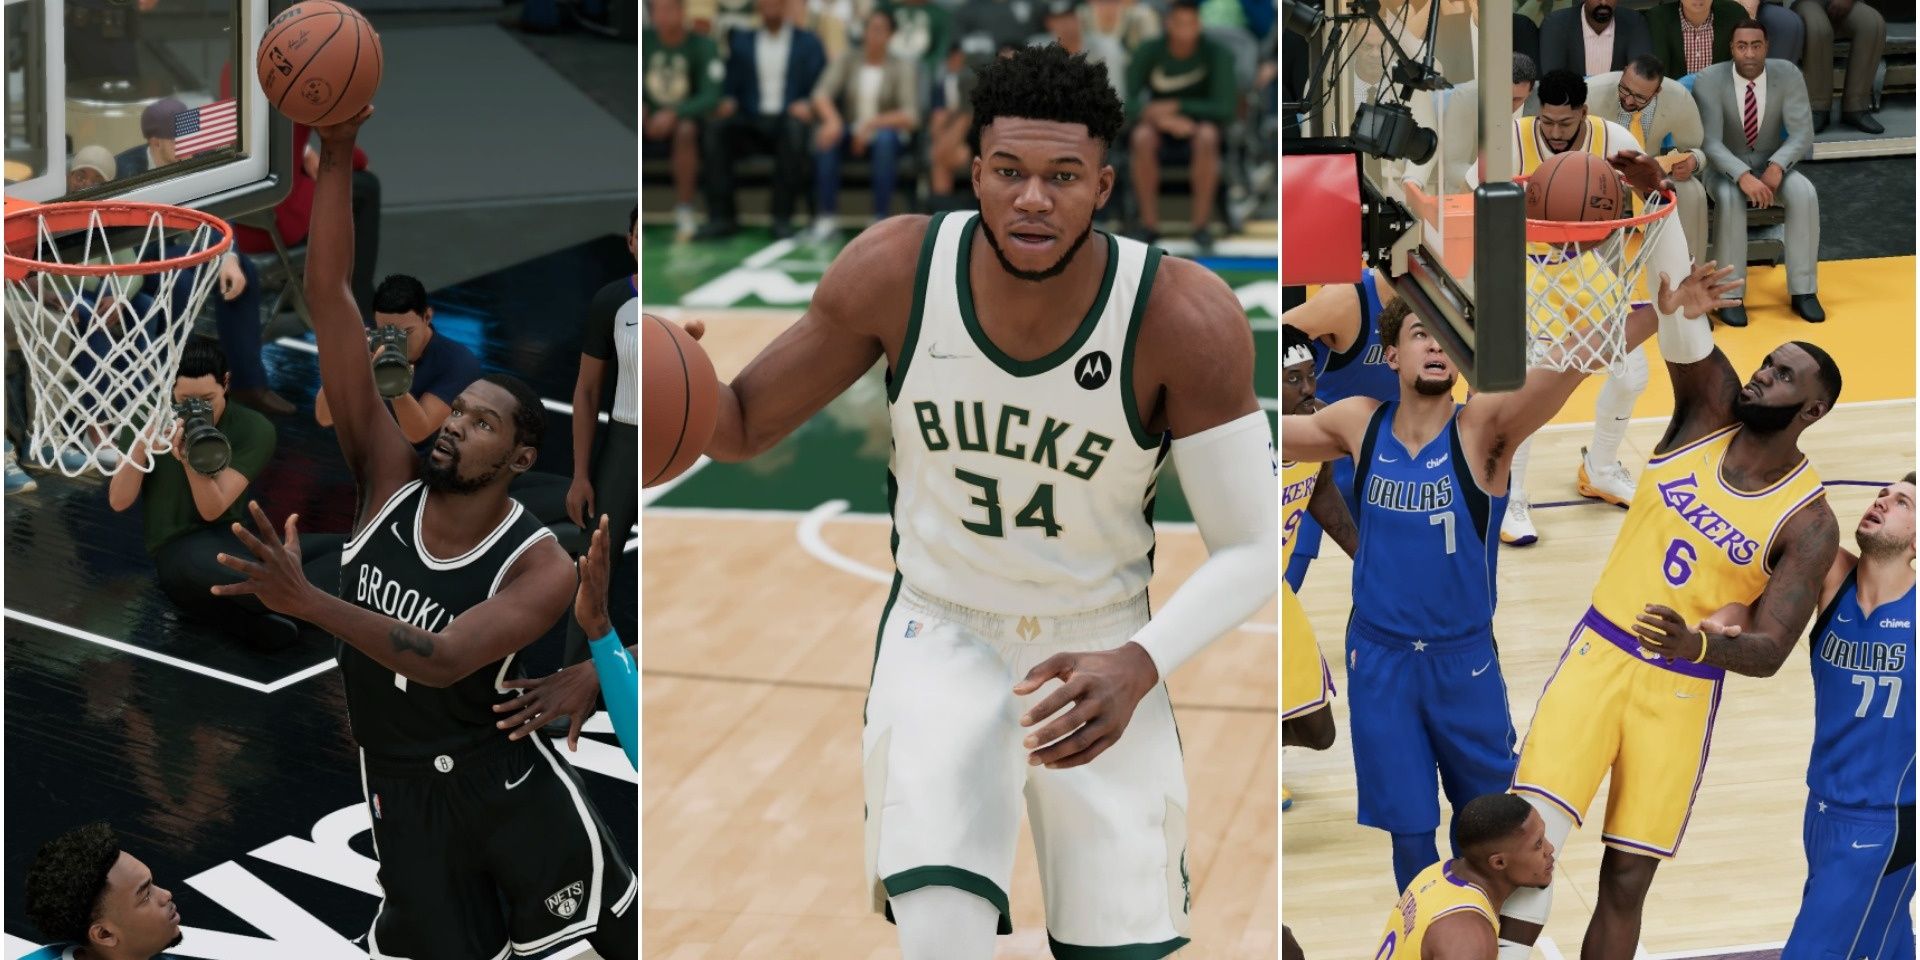 Chances the LA Clippers get an NBA 2k historic team - Page 2